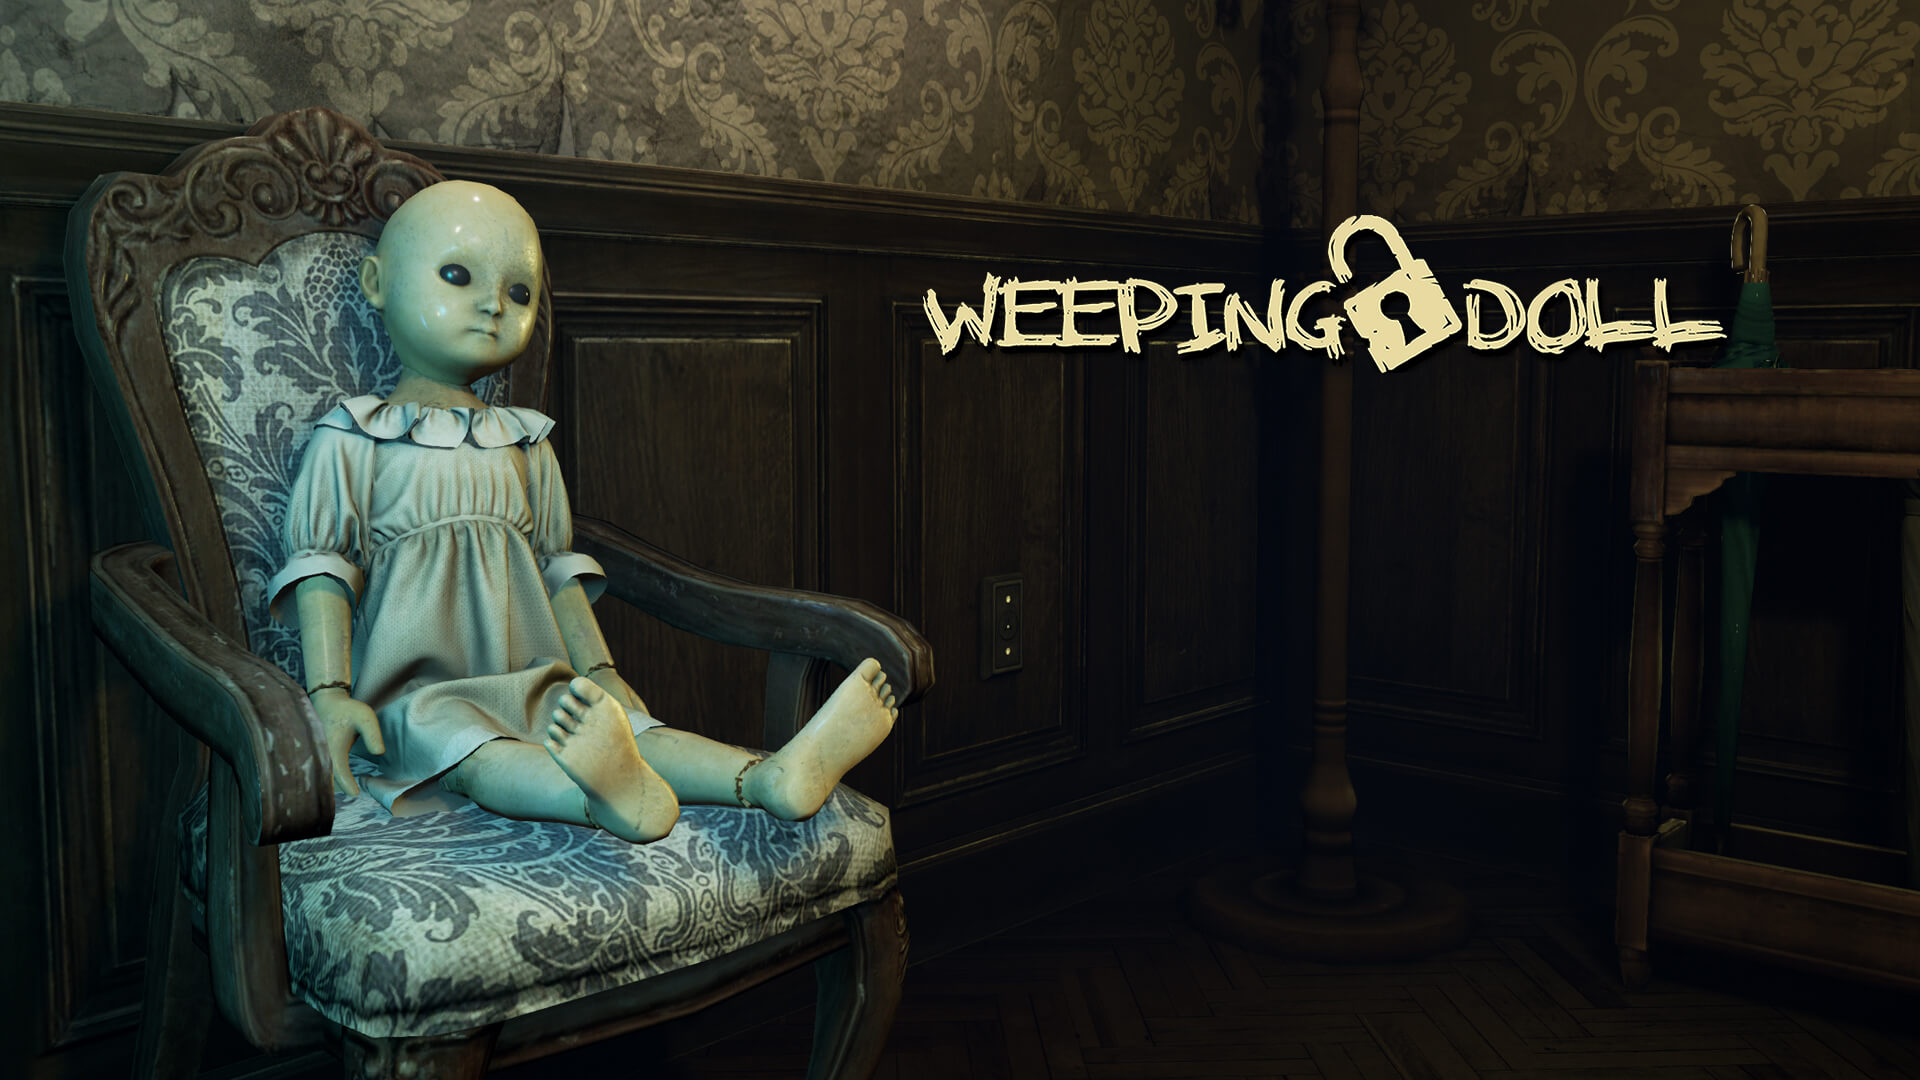 I bet this doll is creepy in VR. 